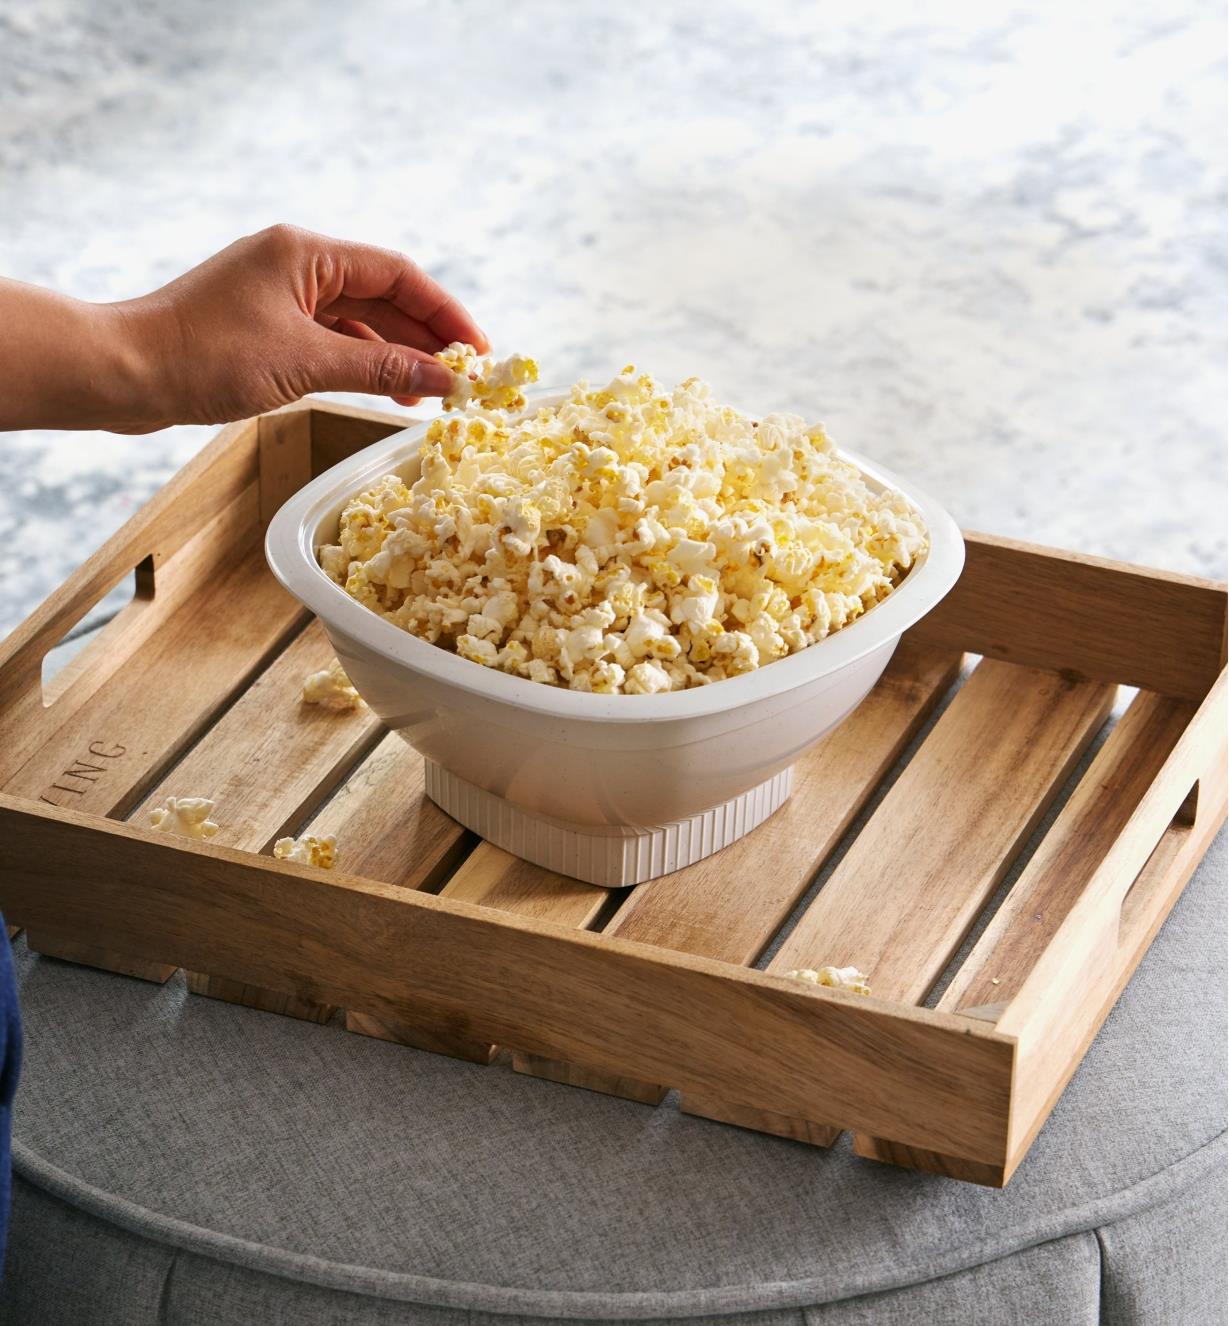 A popper full of popcorn on a wooden tray